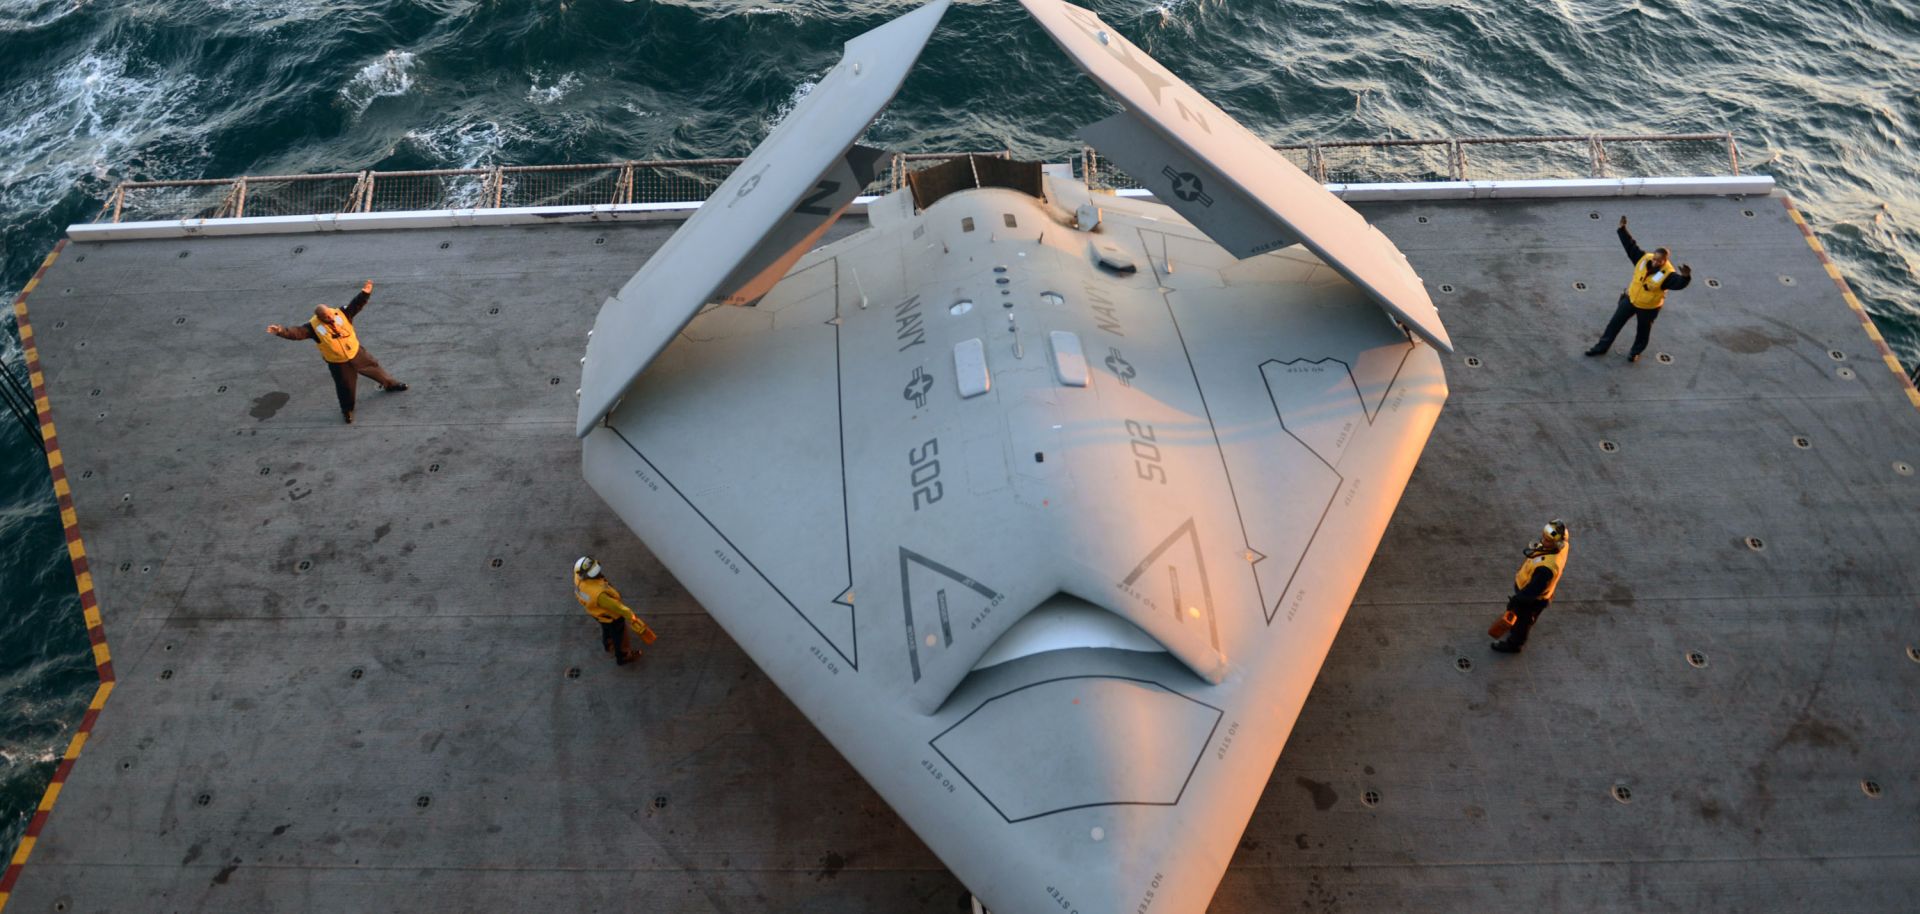 A picture showing U.S. sailors move an X-47B Unmanned Combat Air System (UCAS) demonstrator onto an aircraft elevator aboard the aircraft carrier USS George H.W. Bush.